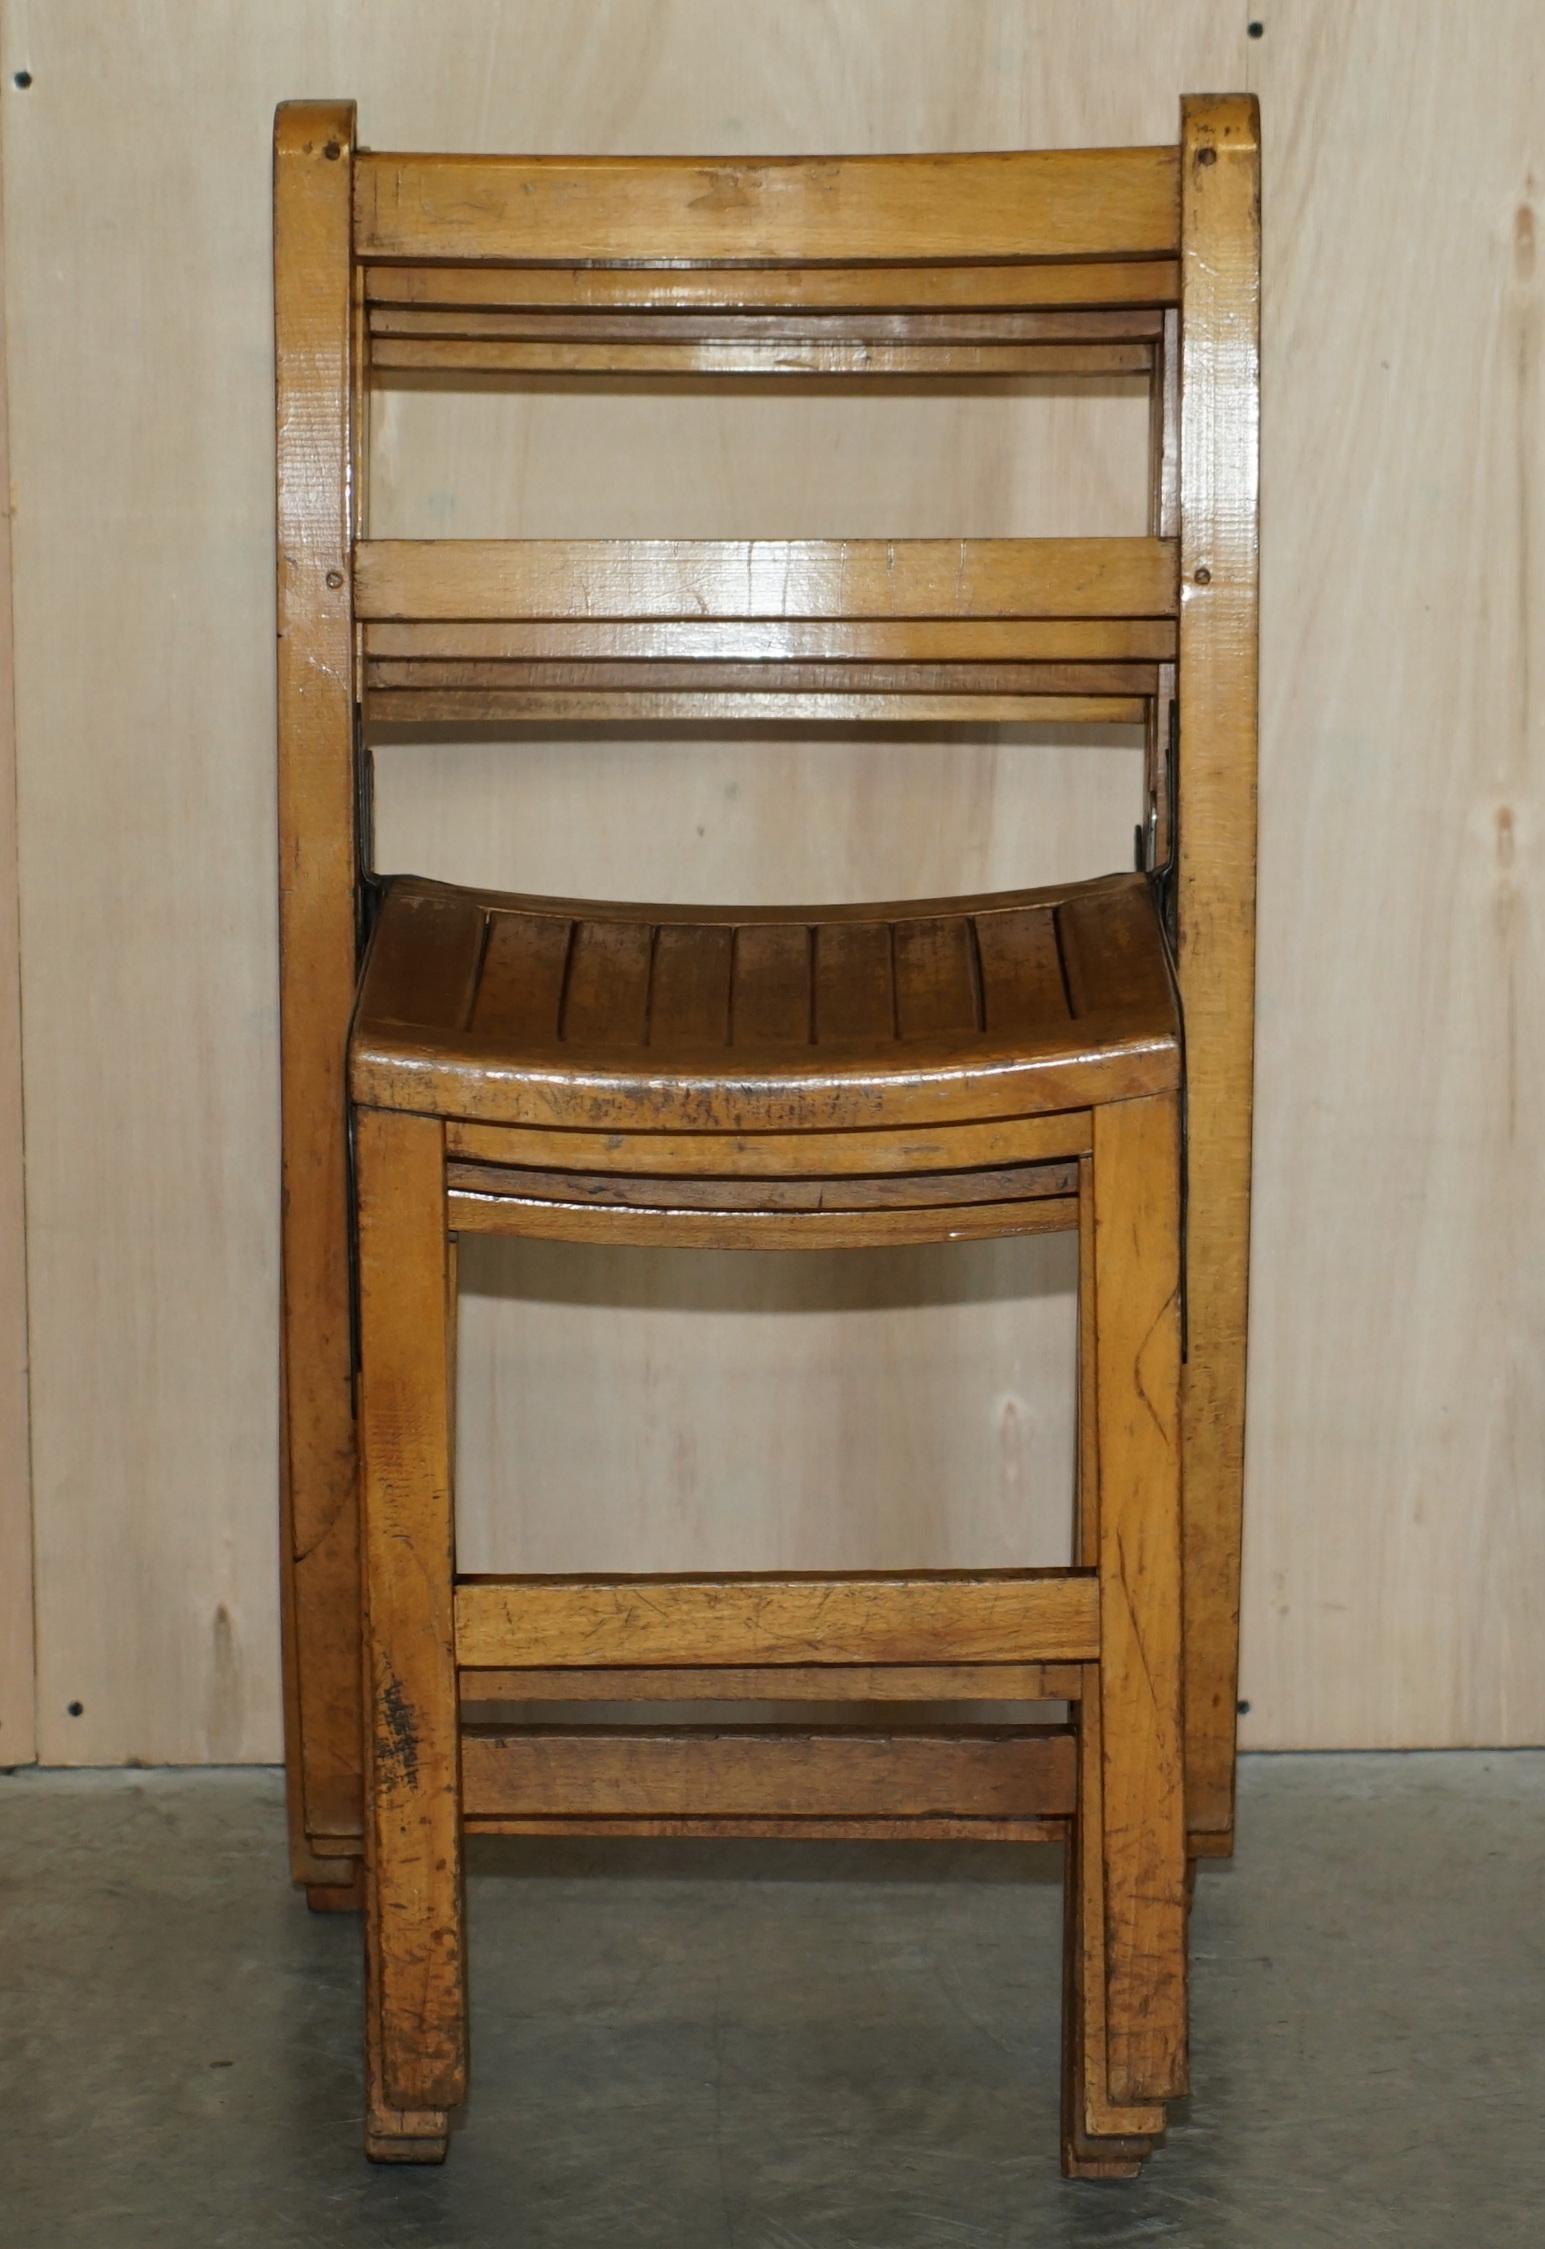 We are delighted to offer for sale this lovely suite of four original circa 1930’s English oak stacking chairs.

A good looking and rustic suite of stacking chairs, they are in original period condition and really set the moon nicely.

Perfectly